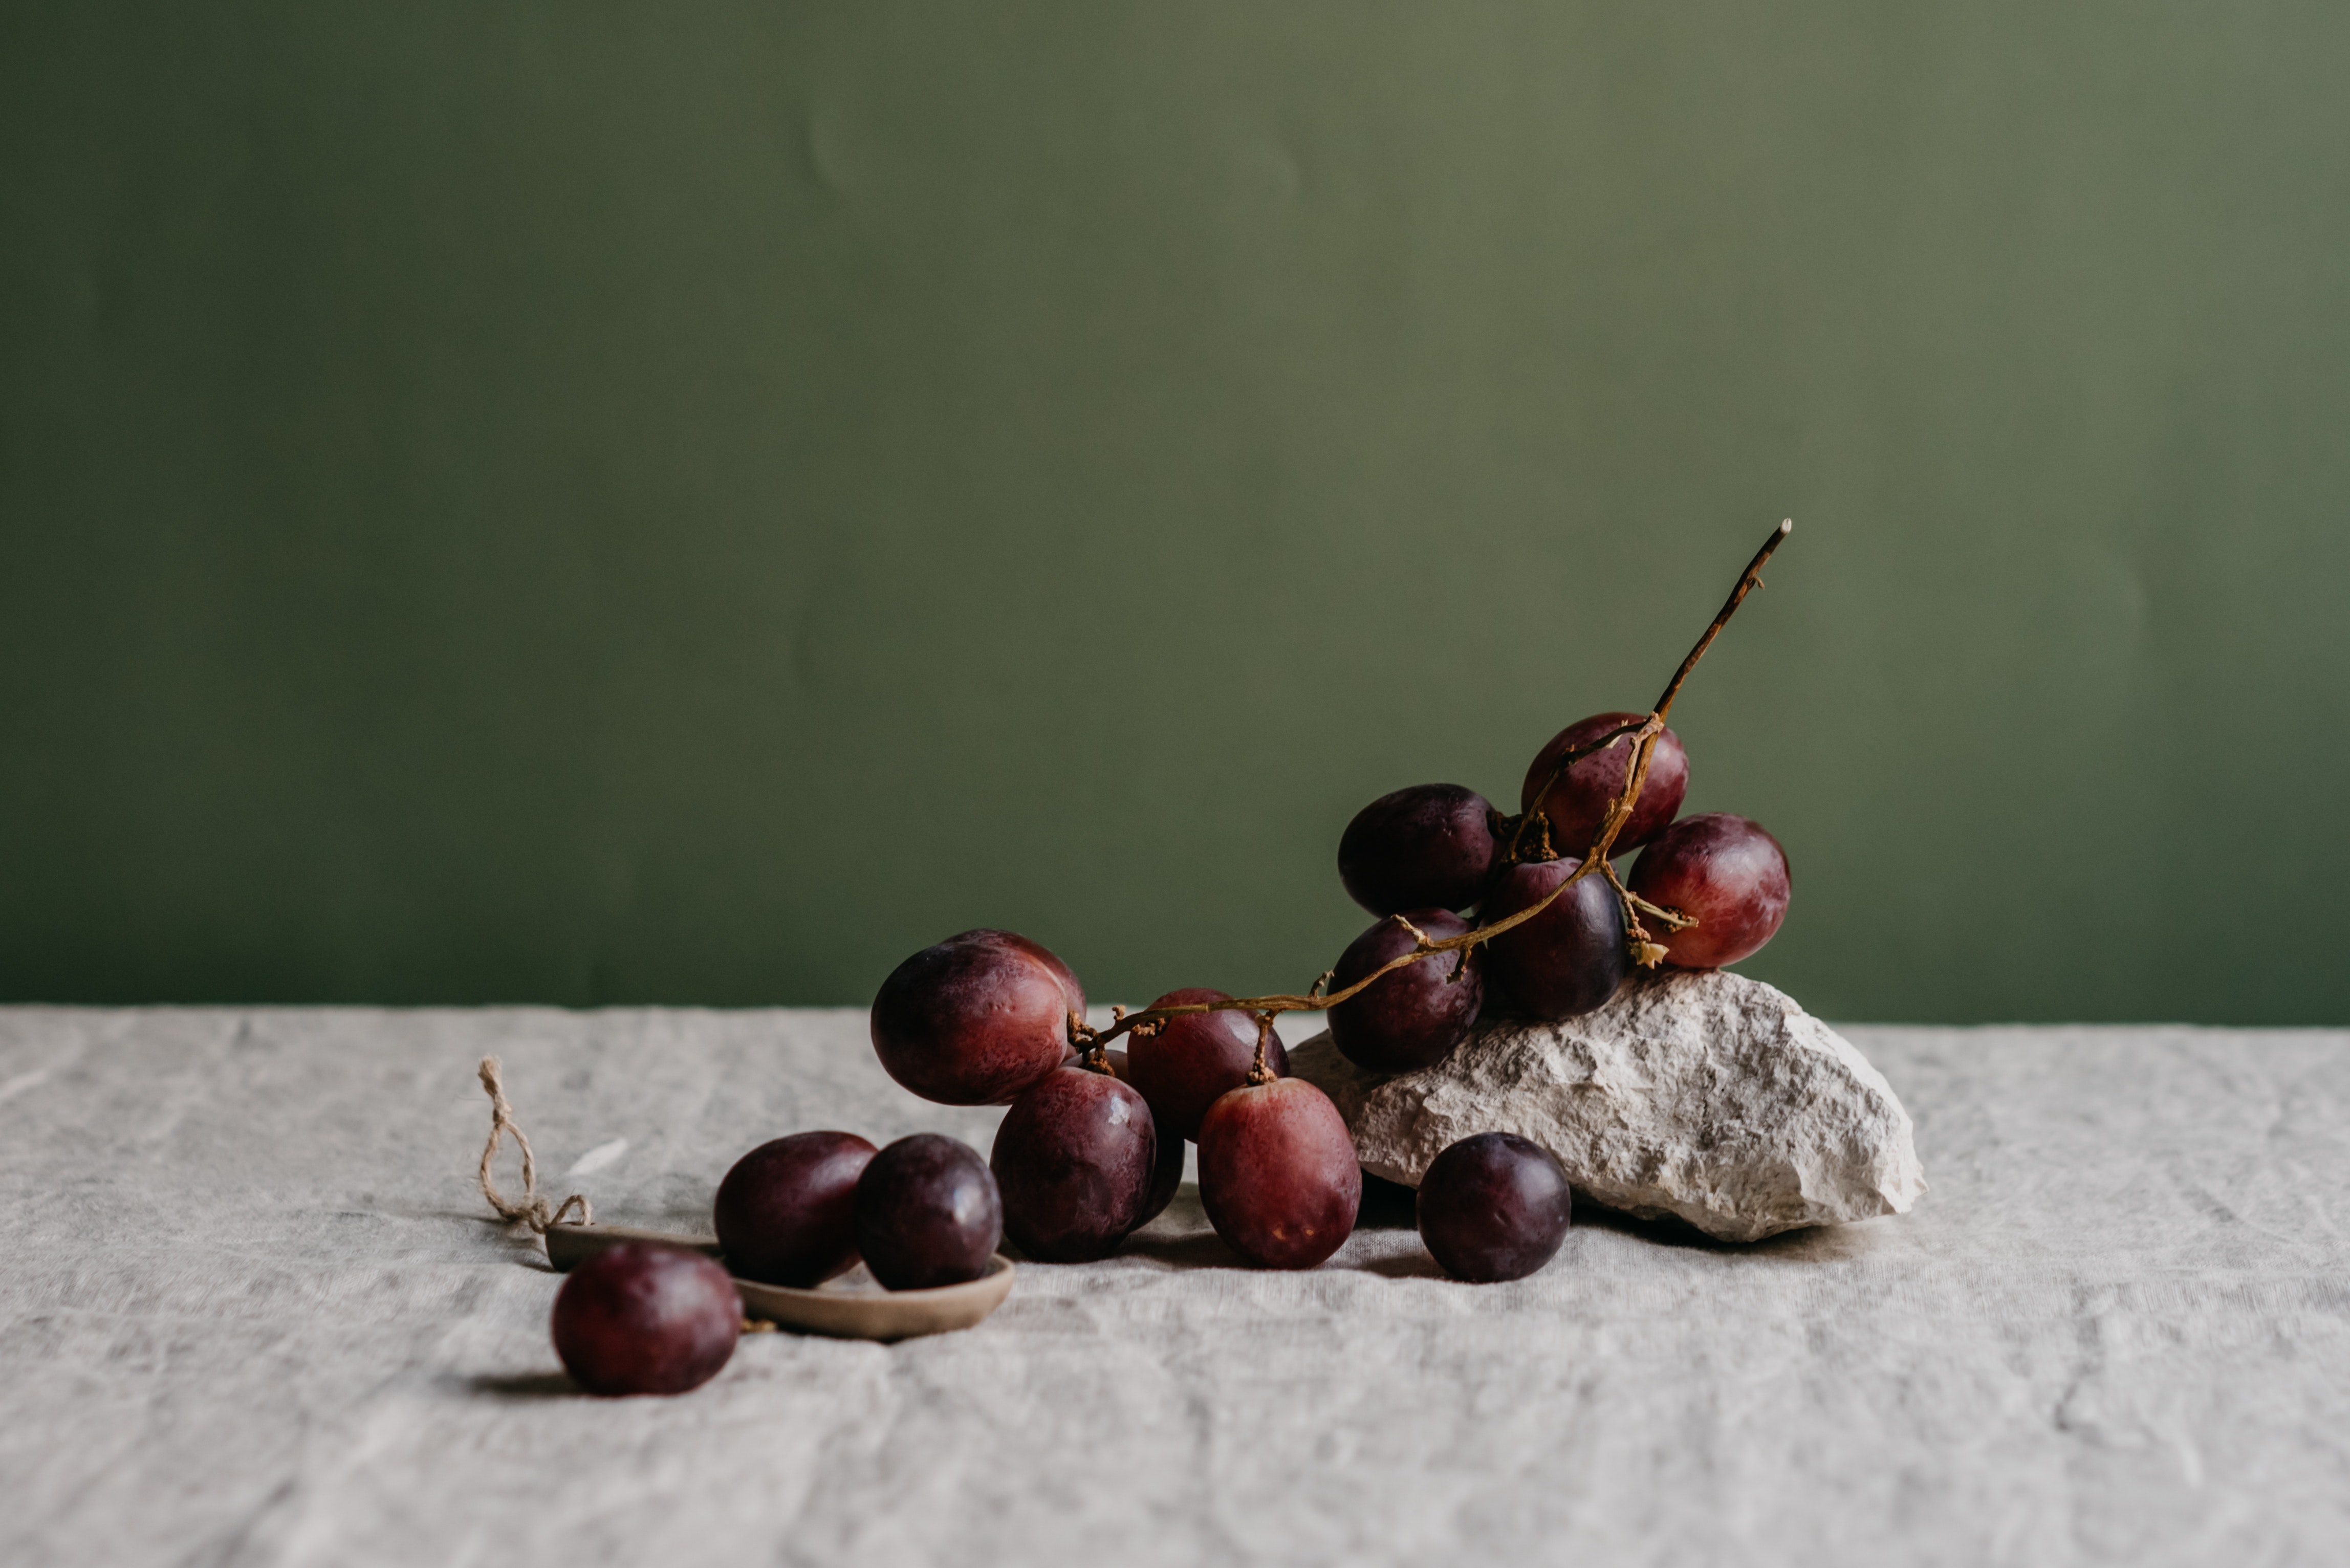 Red grapes sitting on a gray marbled countertop, in front of a dark green background.